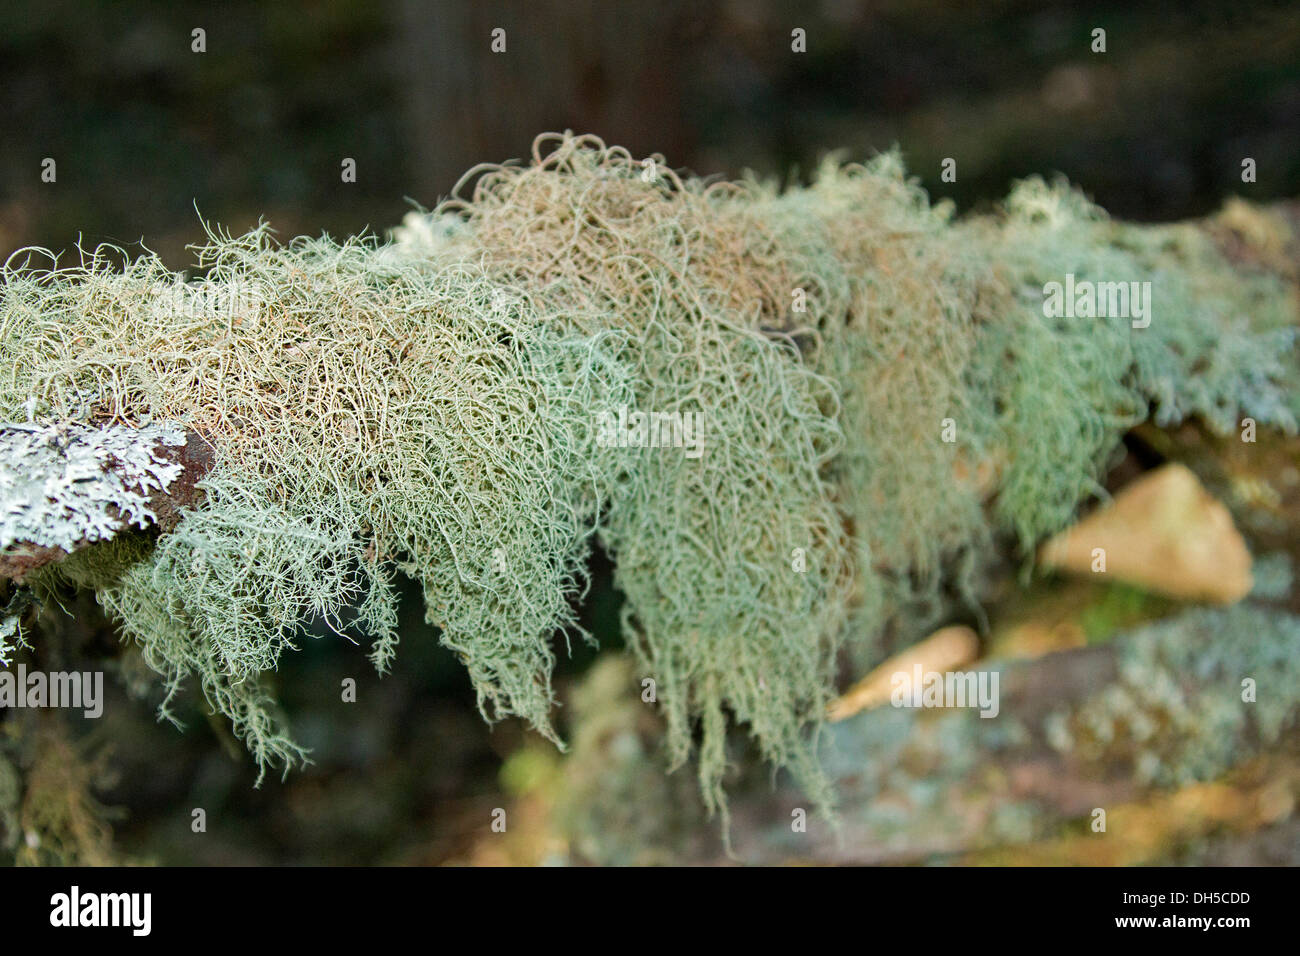 Green / blue lichen growing on branch of tree in Nowendoc State Forest in NSW Australia Stock Photo